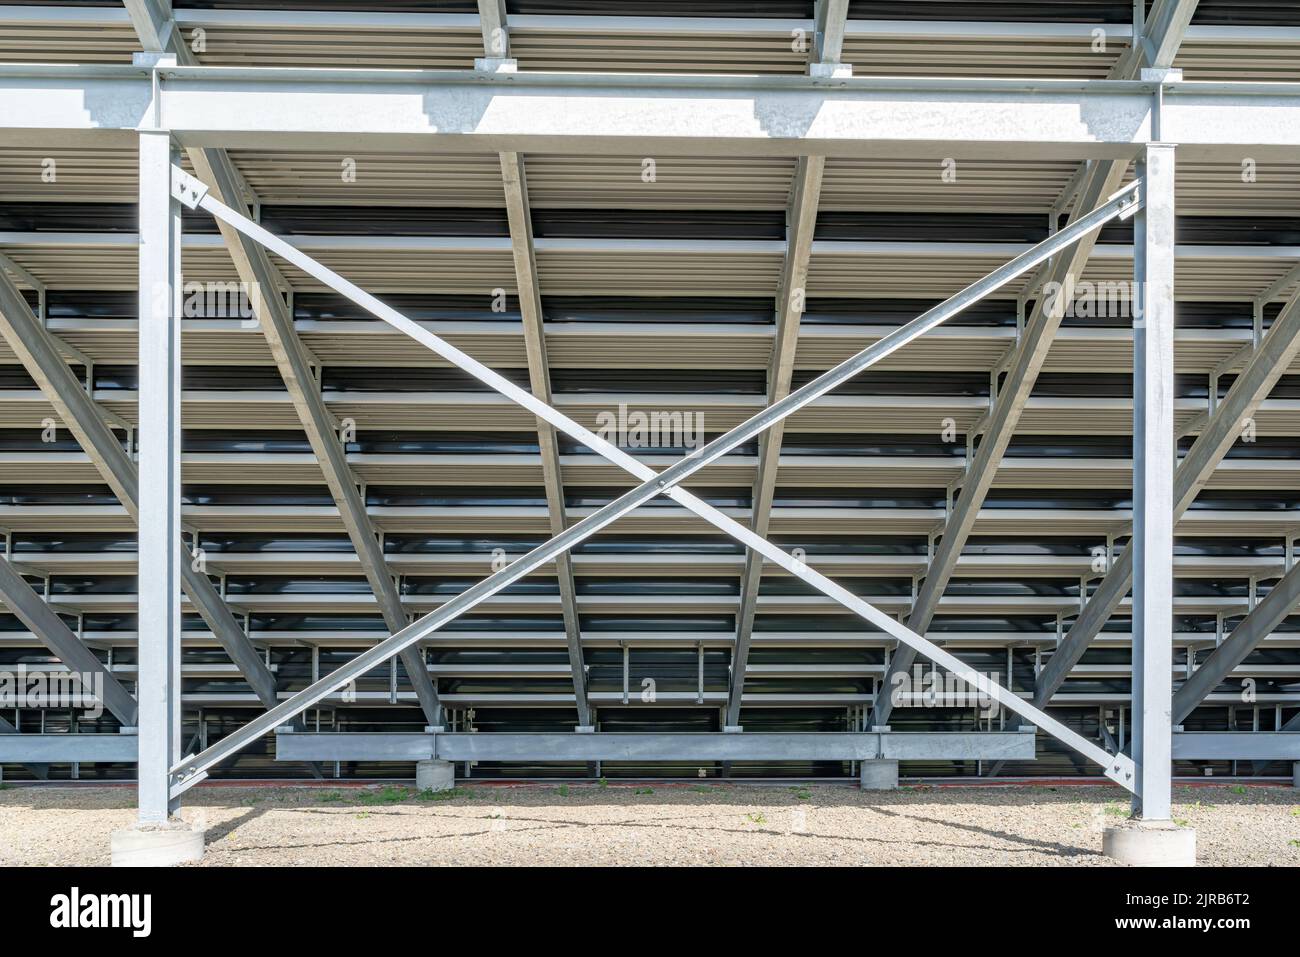 Straight on view of under stadium bleachers, steal I-Beam bleachers with X cross brace, with stone surface. Stock Photo